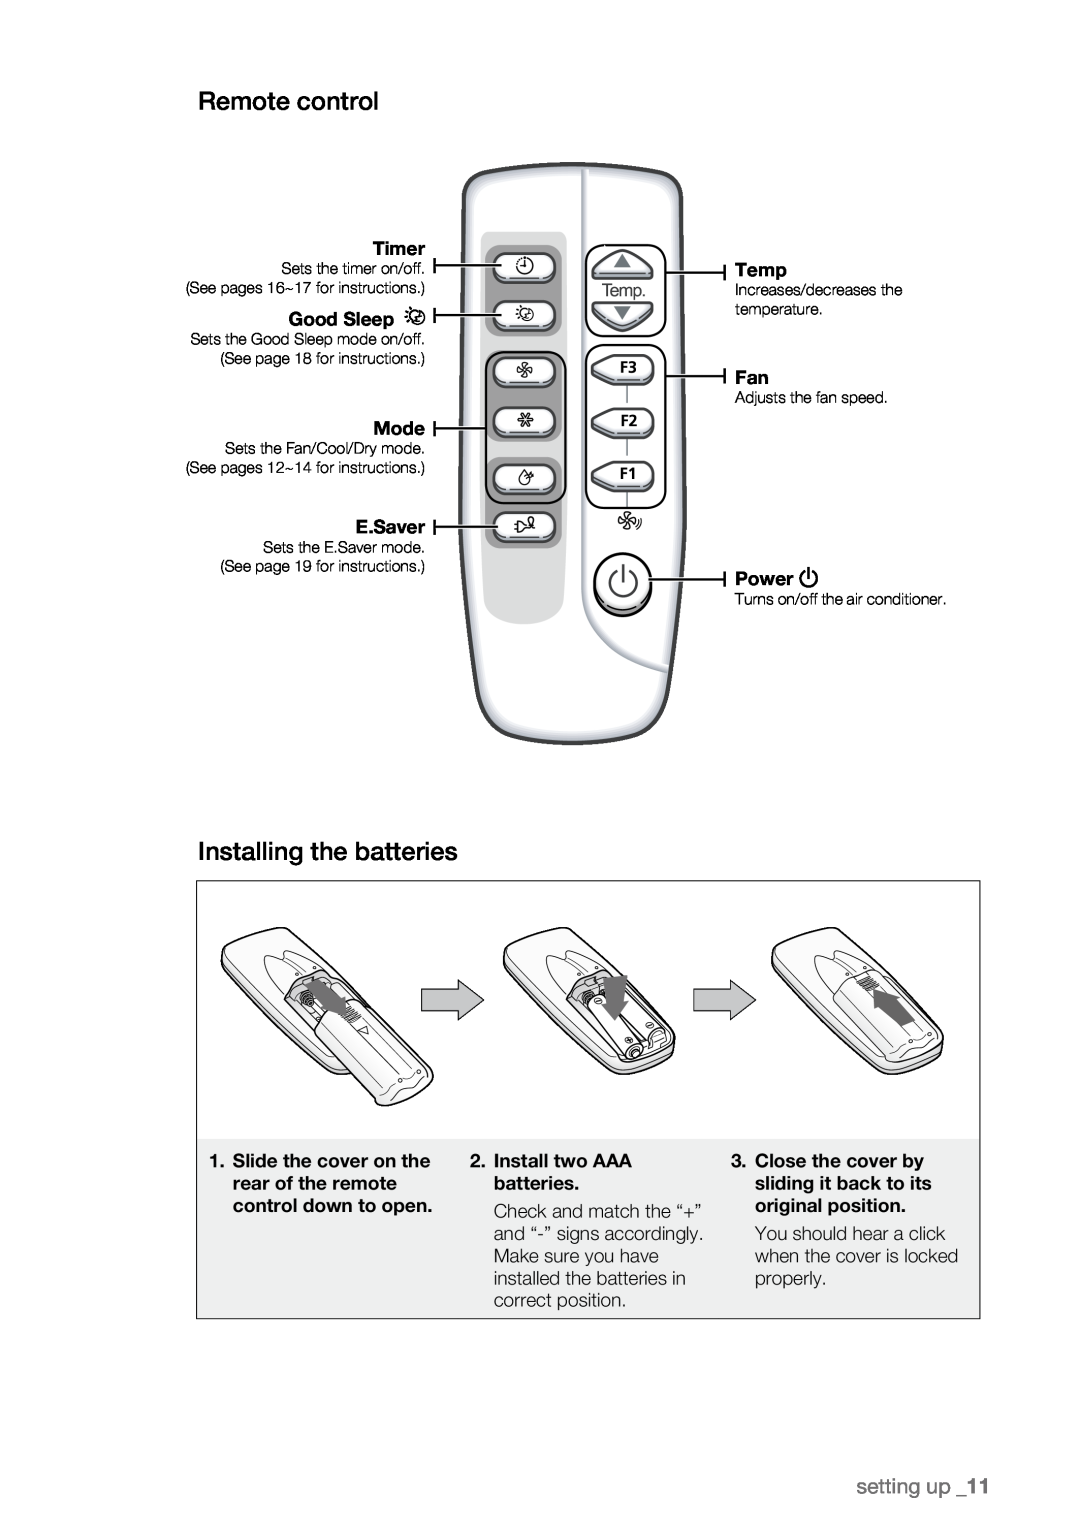 Samsung AW08EDB Series, AW10EDB Series, AW12EDB Series user manual Remote control, Installing the batteries, setting up 